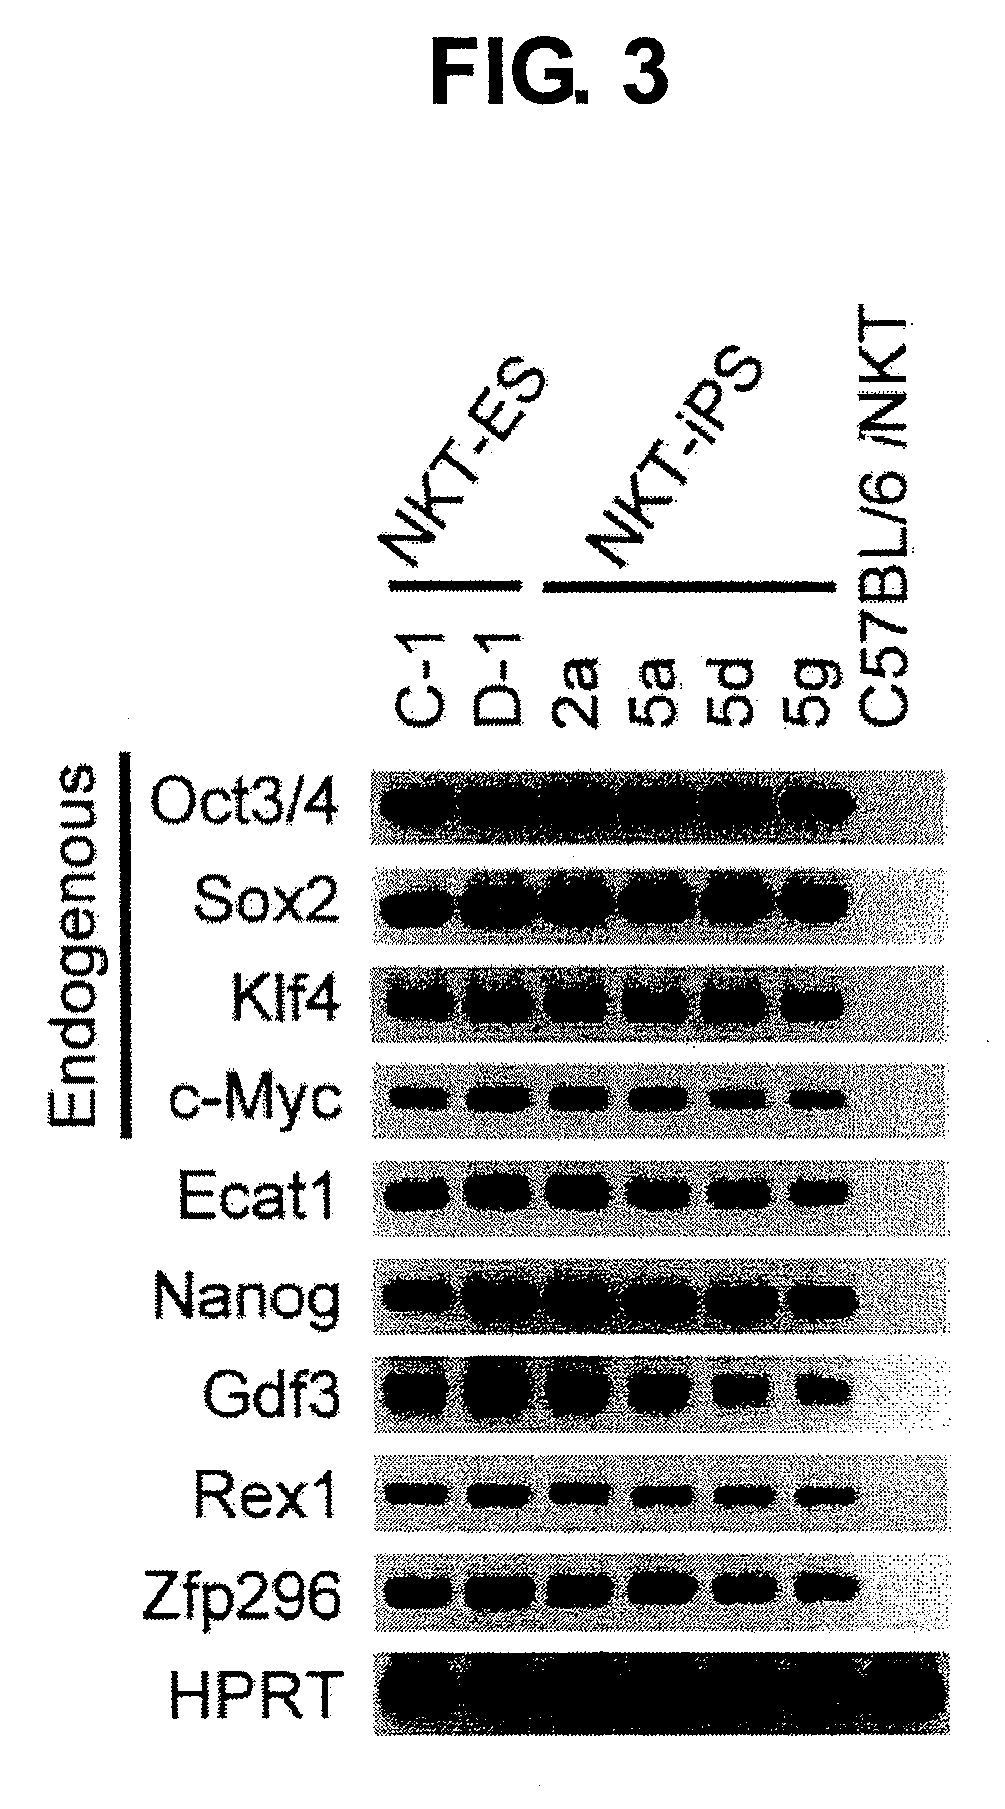 Generating a mature NKT cell from a reprogrammed somatic cell with a T-cell antigen receptor α-chain region rearranged to uniform Va-Ja in a NKT-cell specific way